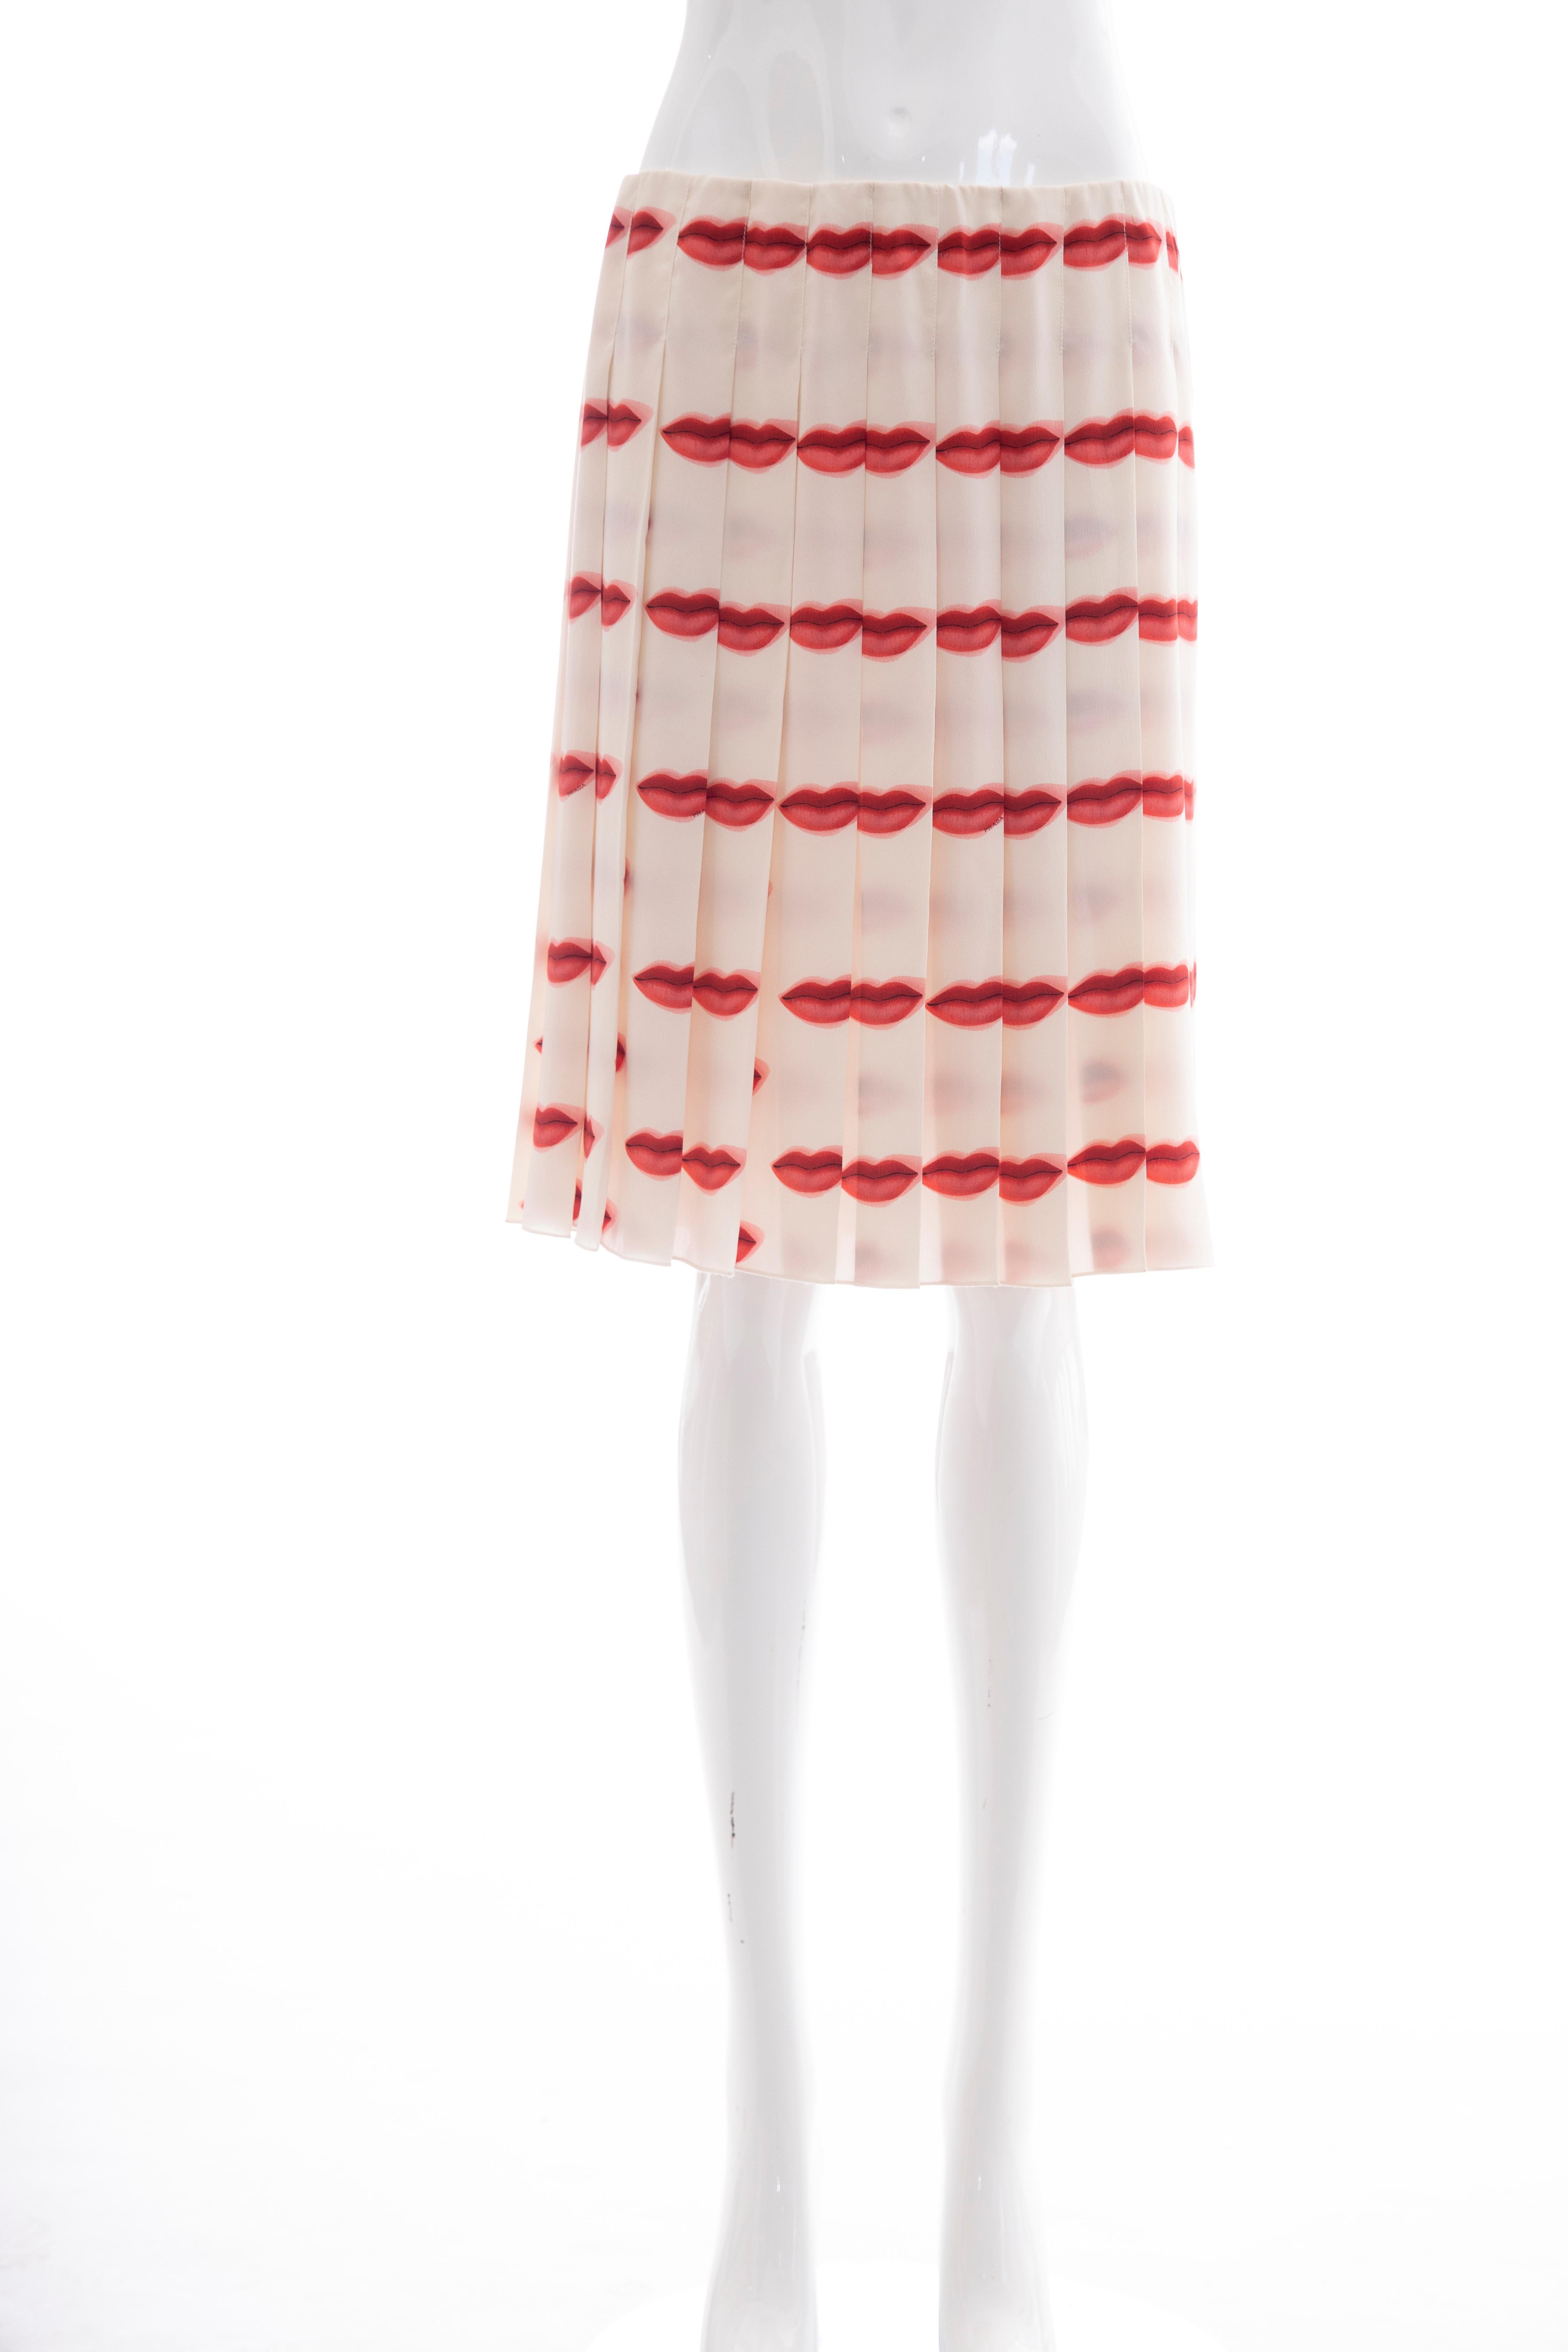 Prada Runway, Spring-Summer 2000, silk skirt with lip print throughout, grosgrain waistband, top stitch pleating and hidden side snap closures.

Featured in the exhibition “Schiaparelli & Prada: impossible conversations” (2012) at the Met in New